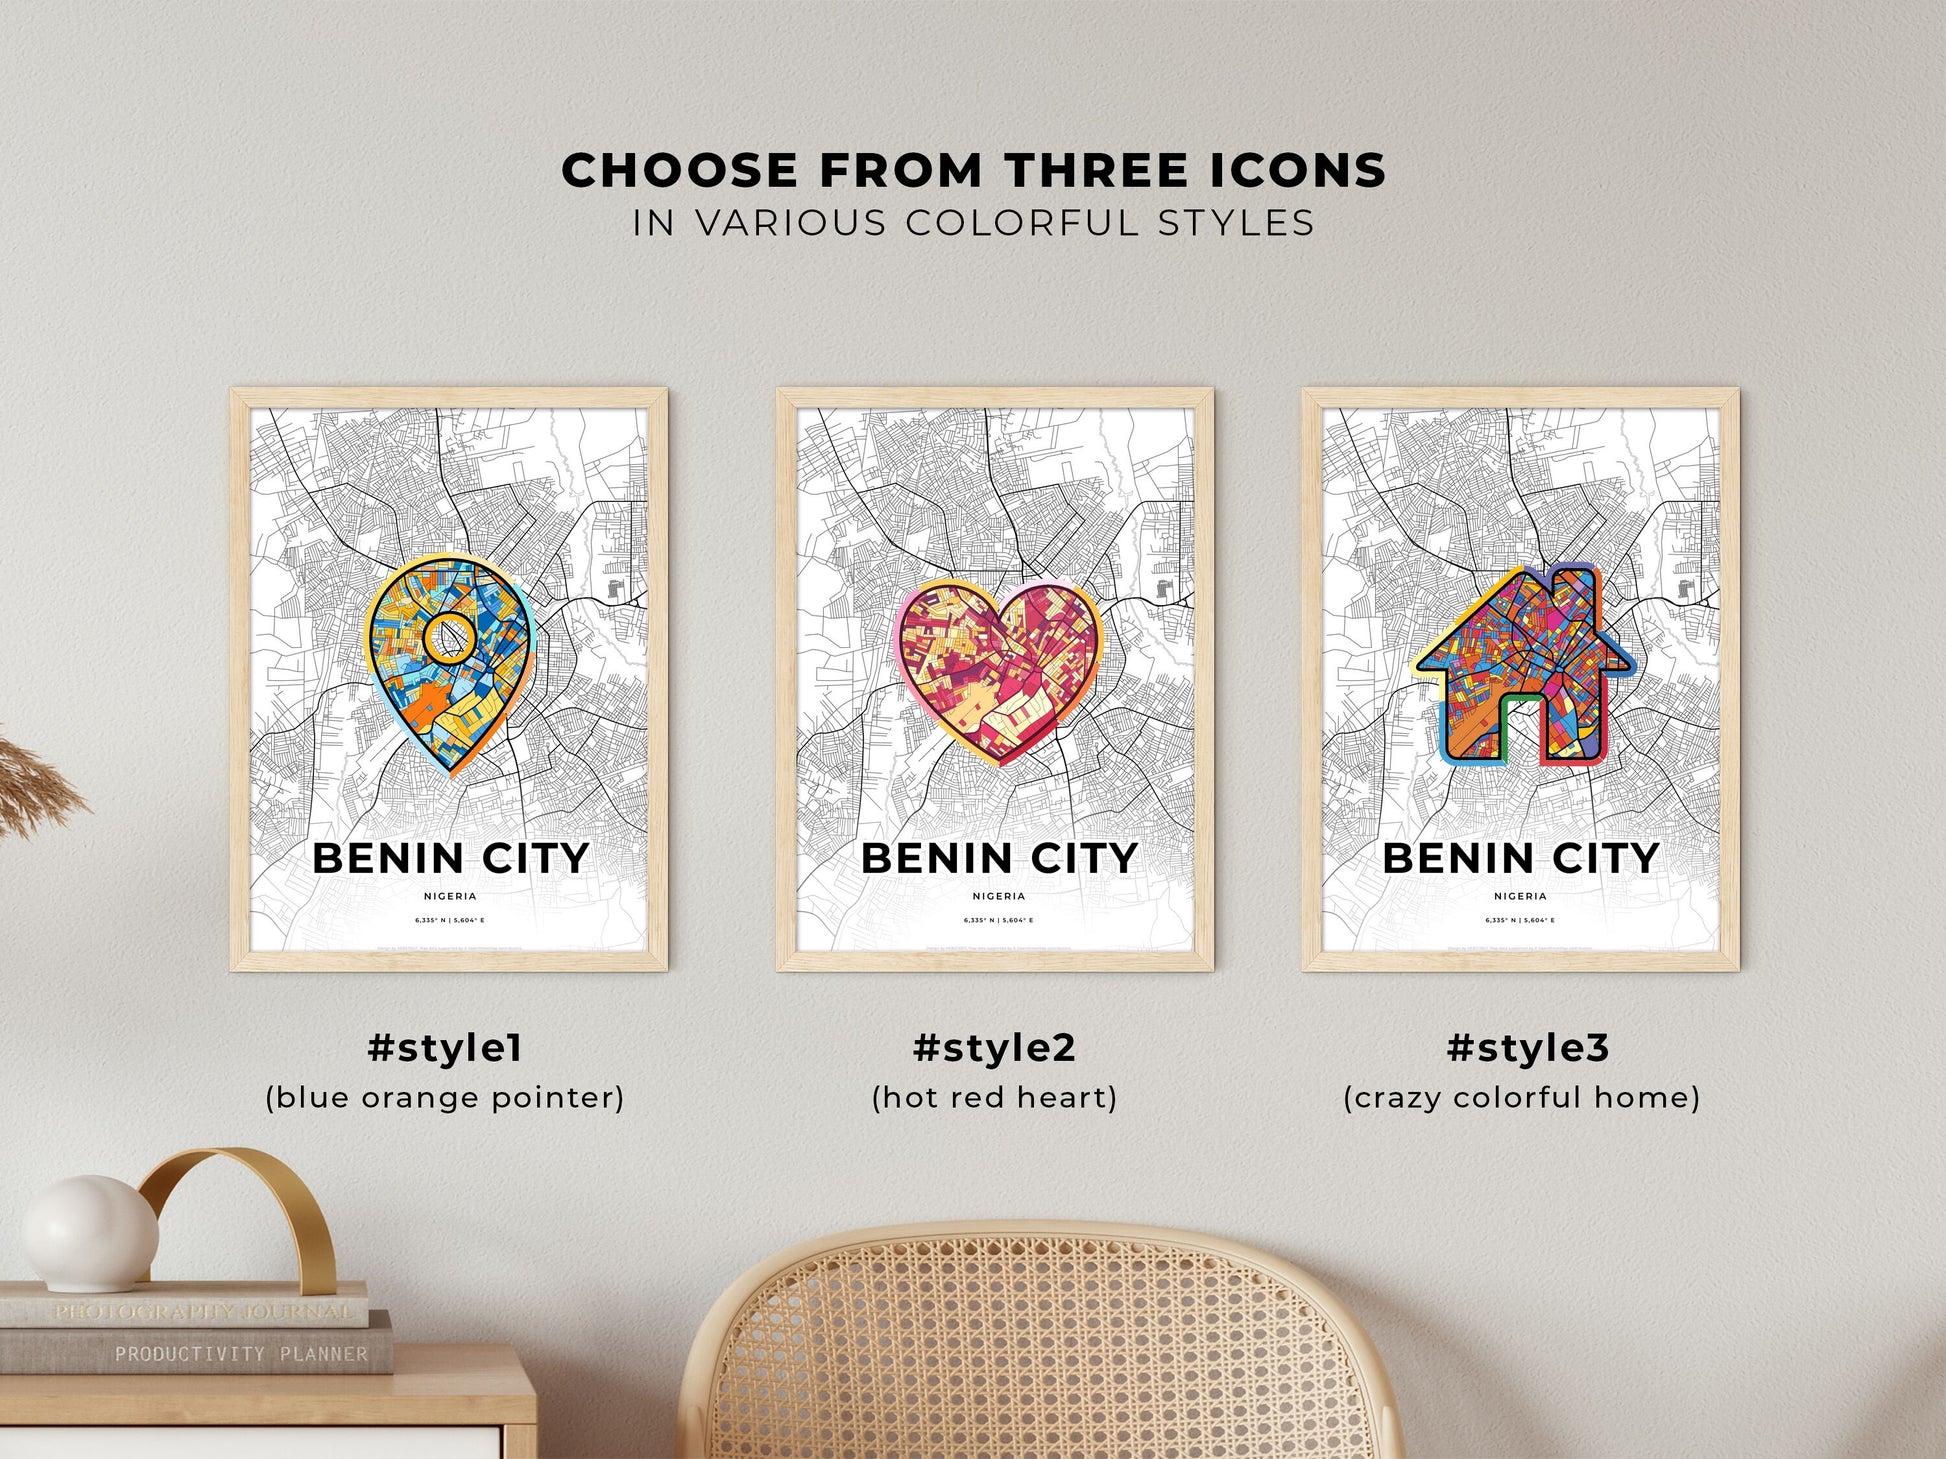 BENIN CITY NIGERIA minimal art map with a colorful icon. Where it all began, Couple map gift.